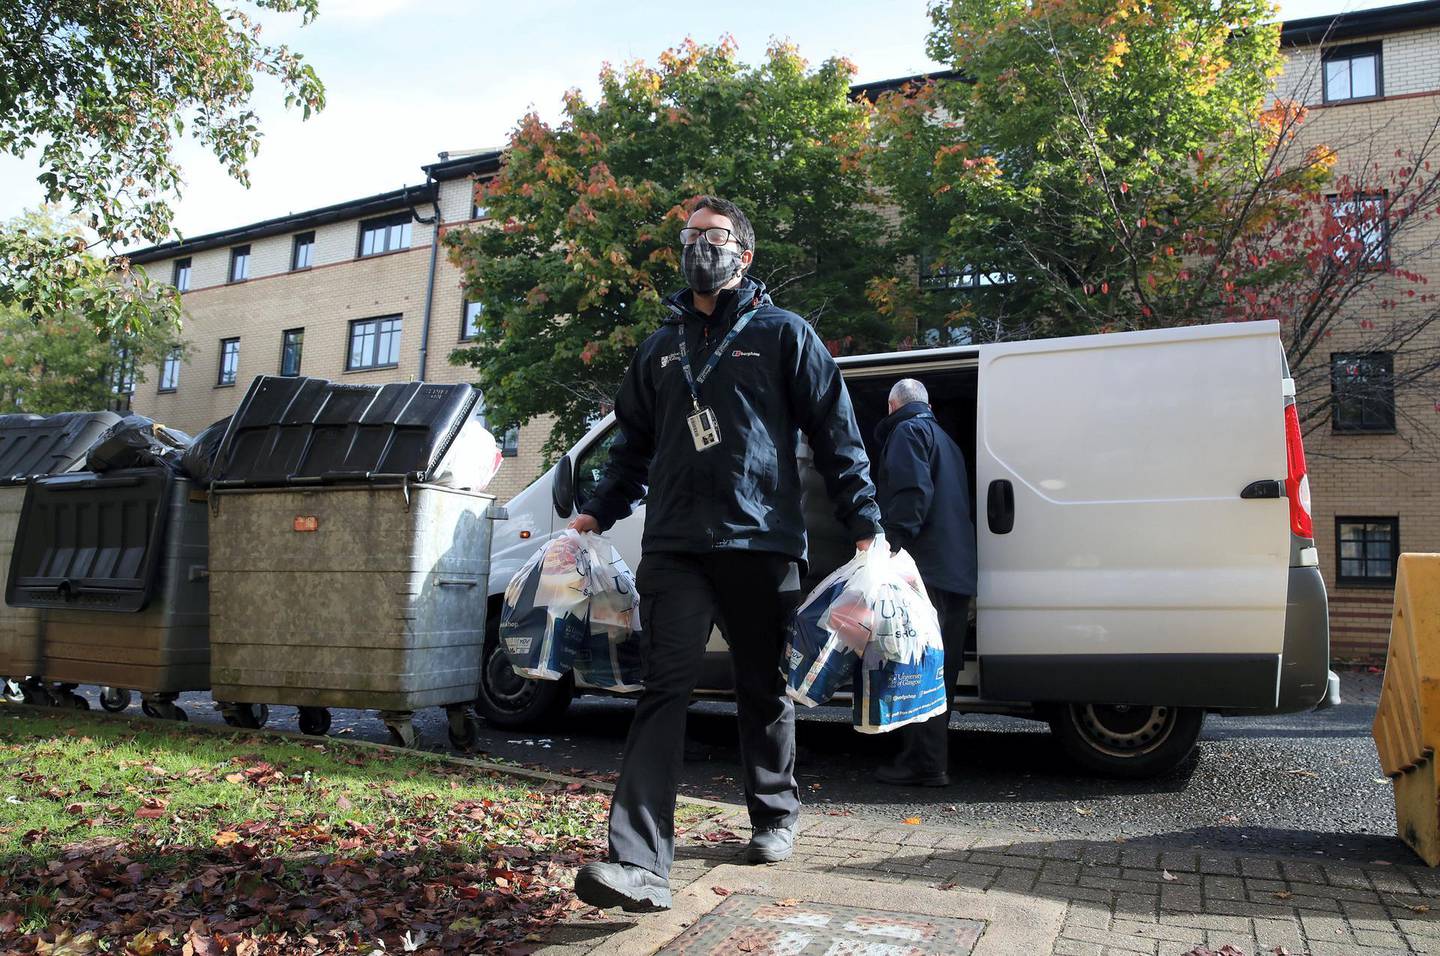 Food parcels are handed out by the University of Glasgow to students staying at the Murano Street Student Village. (Photo by Andrew Milligan/PA Images via Getty Images)